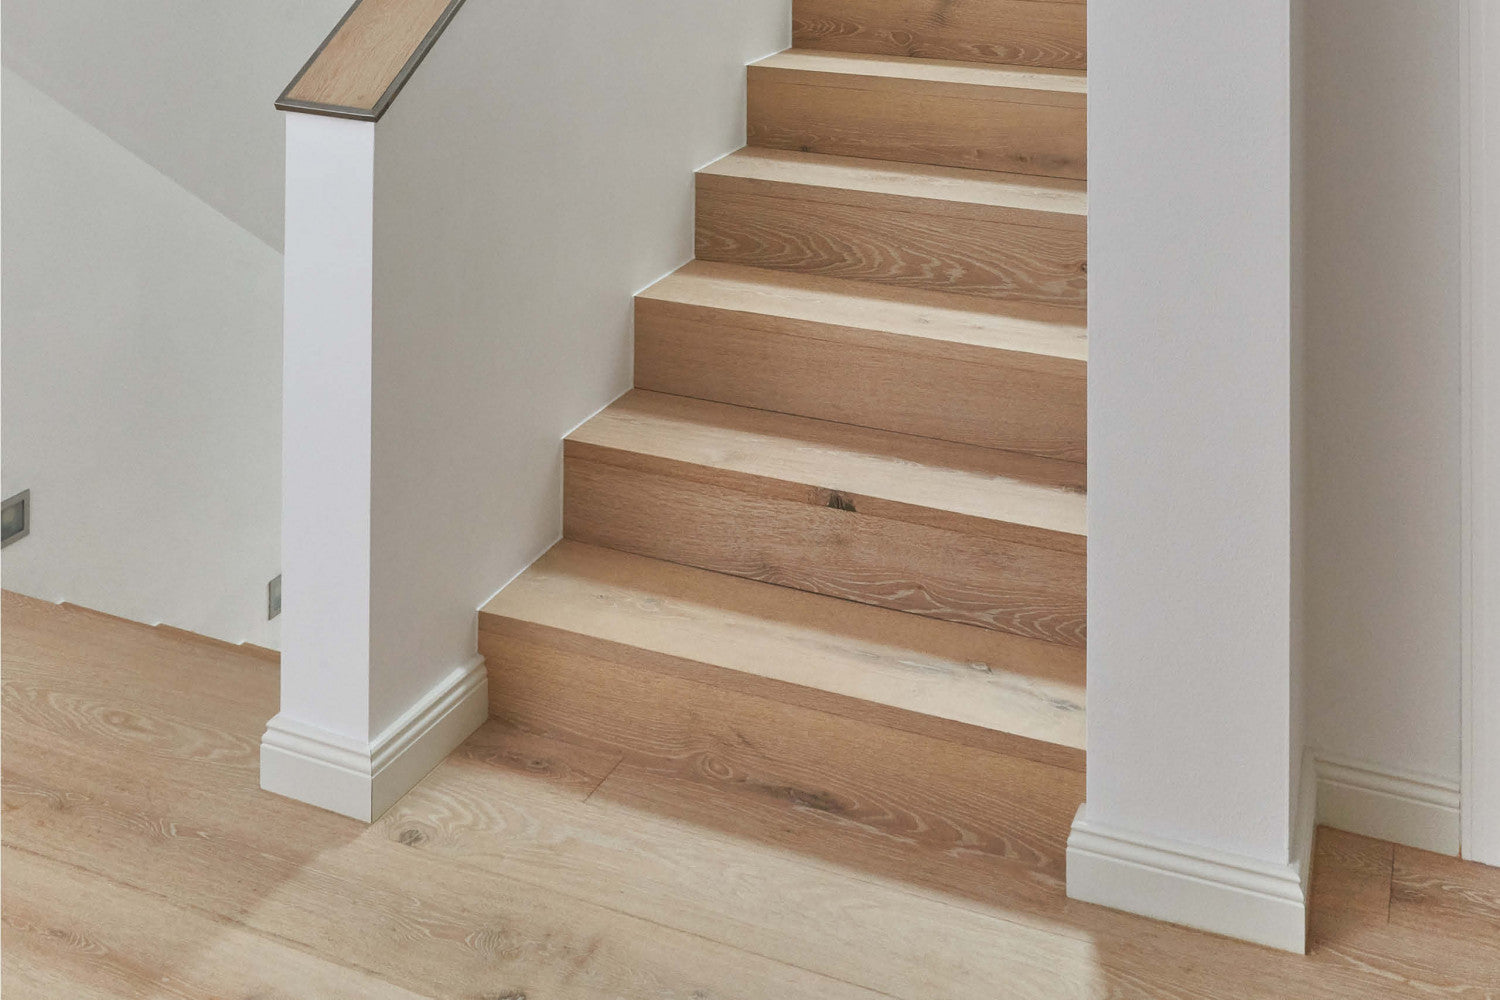 How to Protect Hardwood Floors From Damage